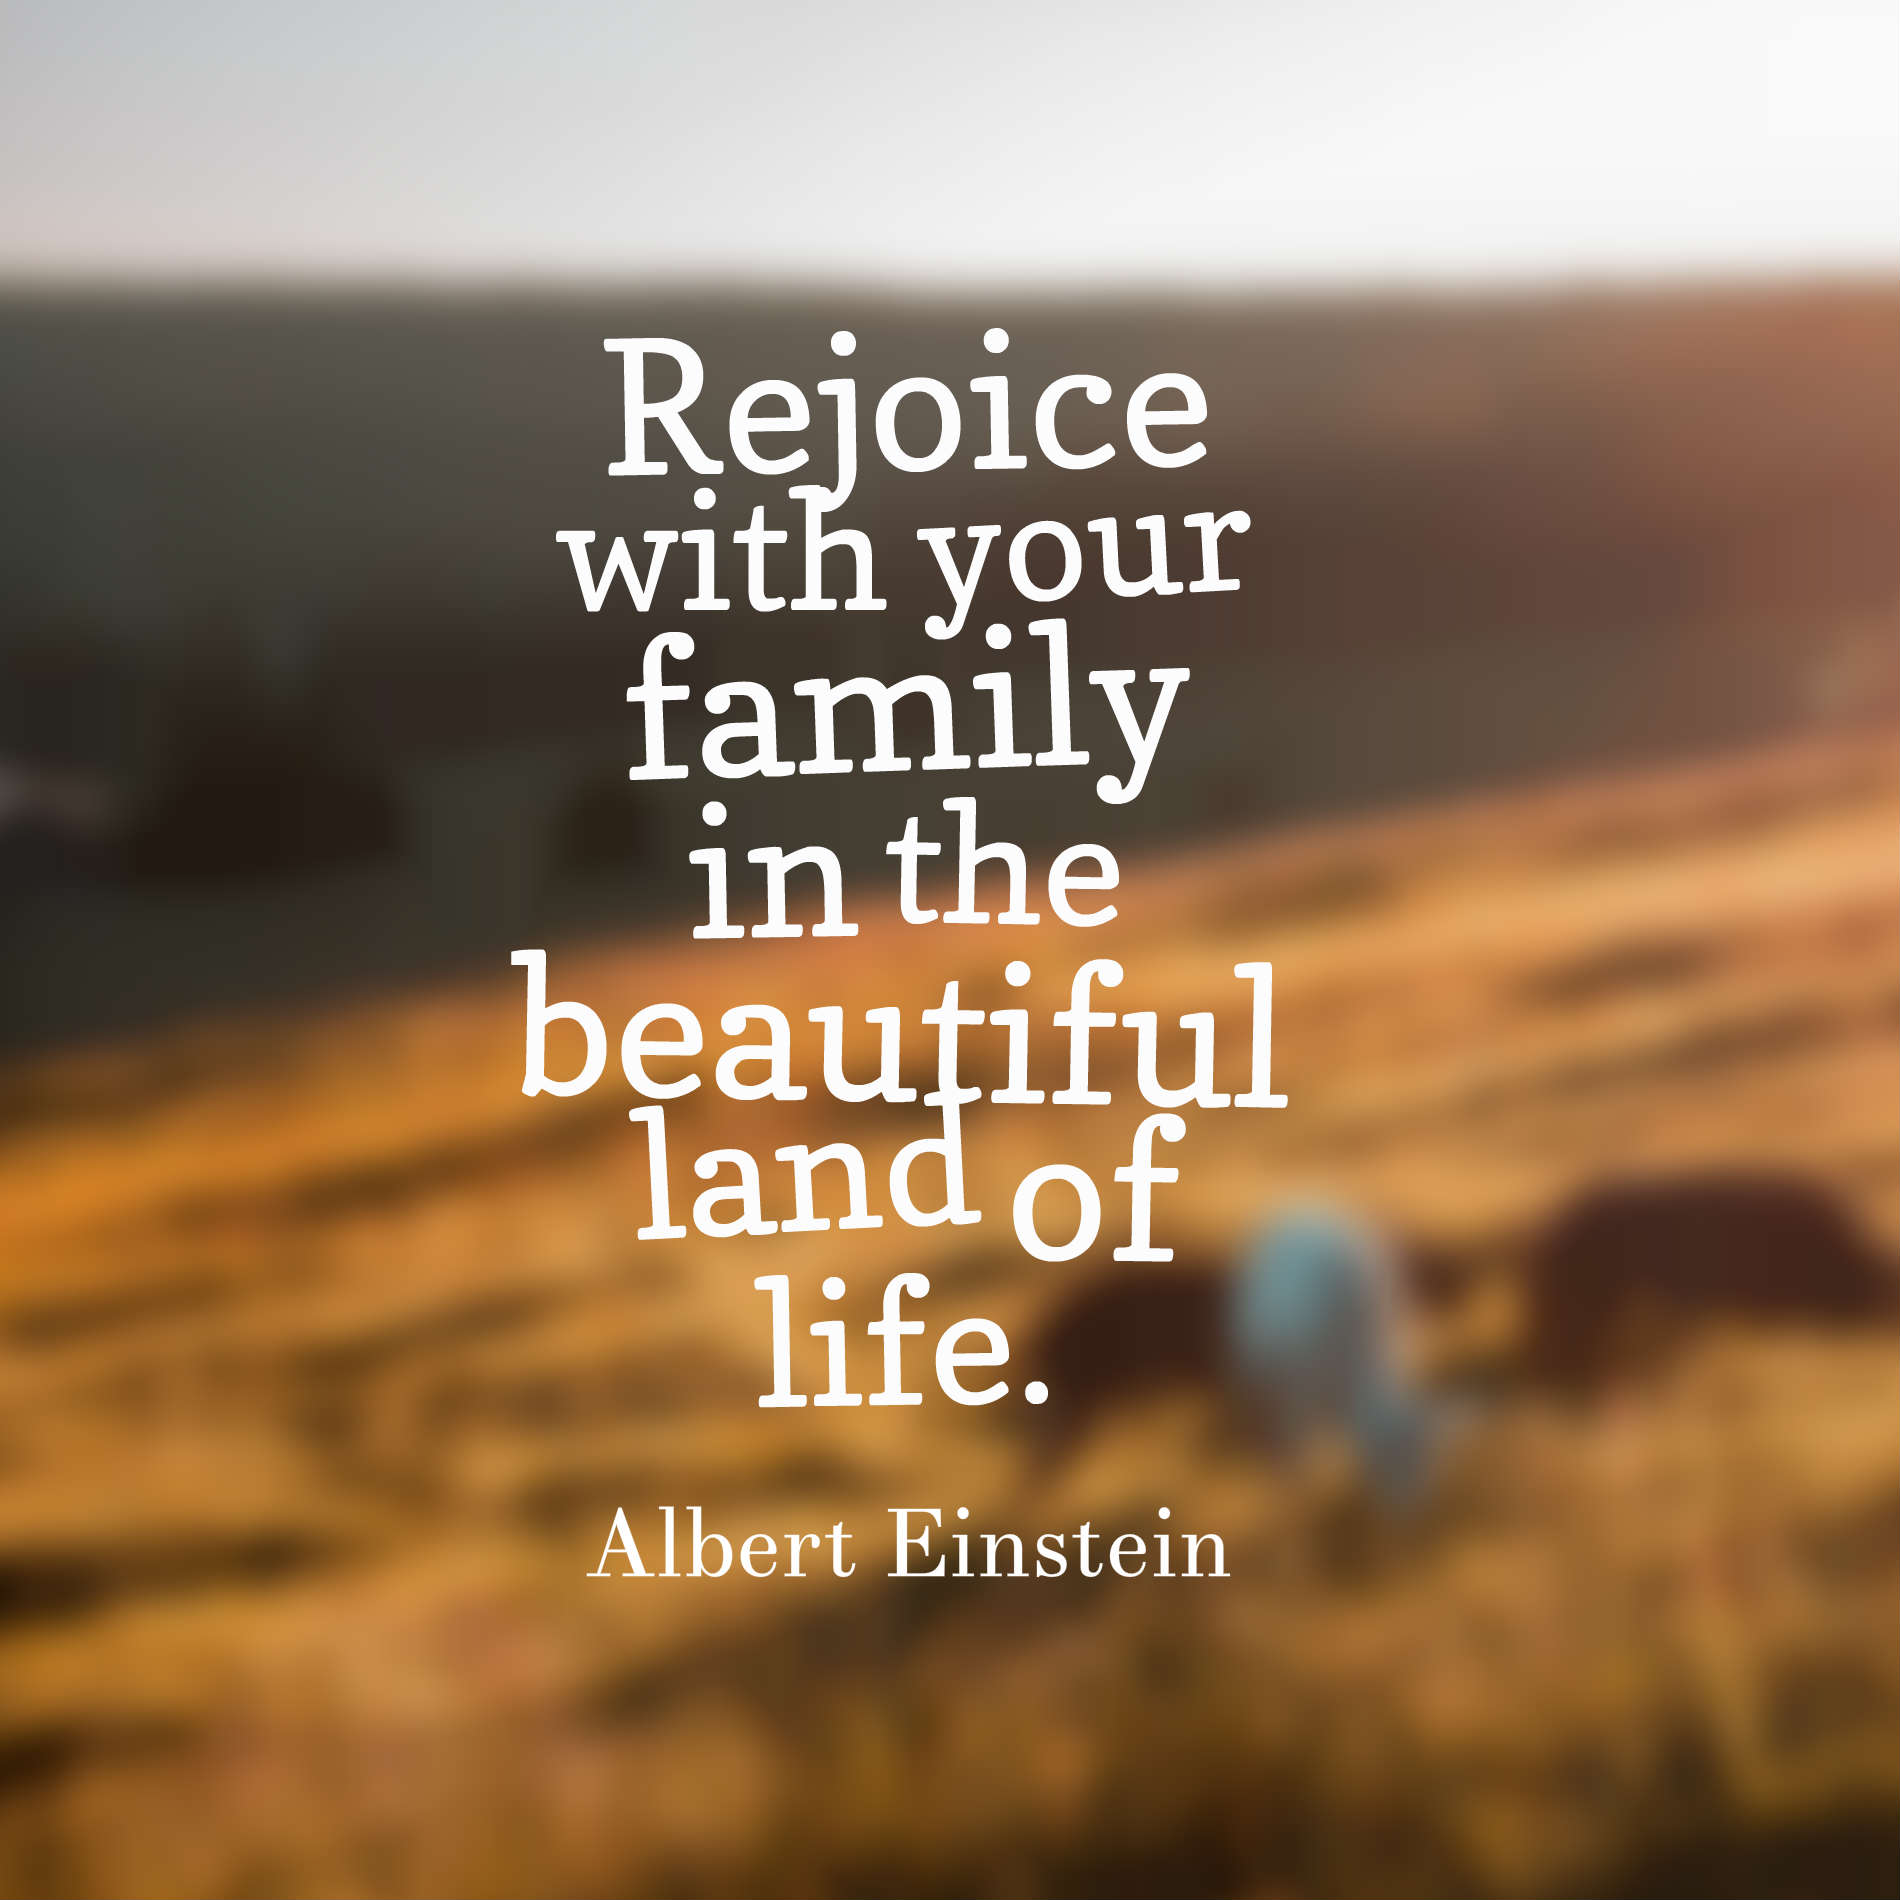 Rejoice with your family in the beautiful land of life.